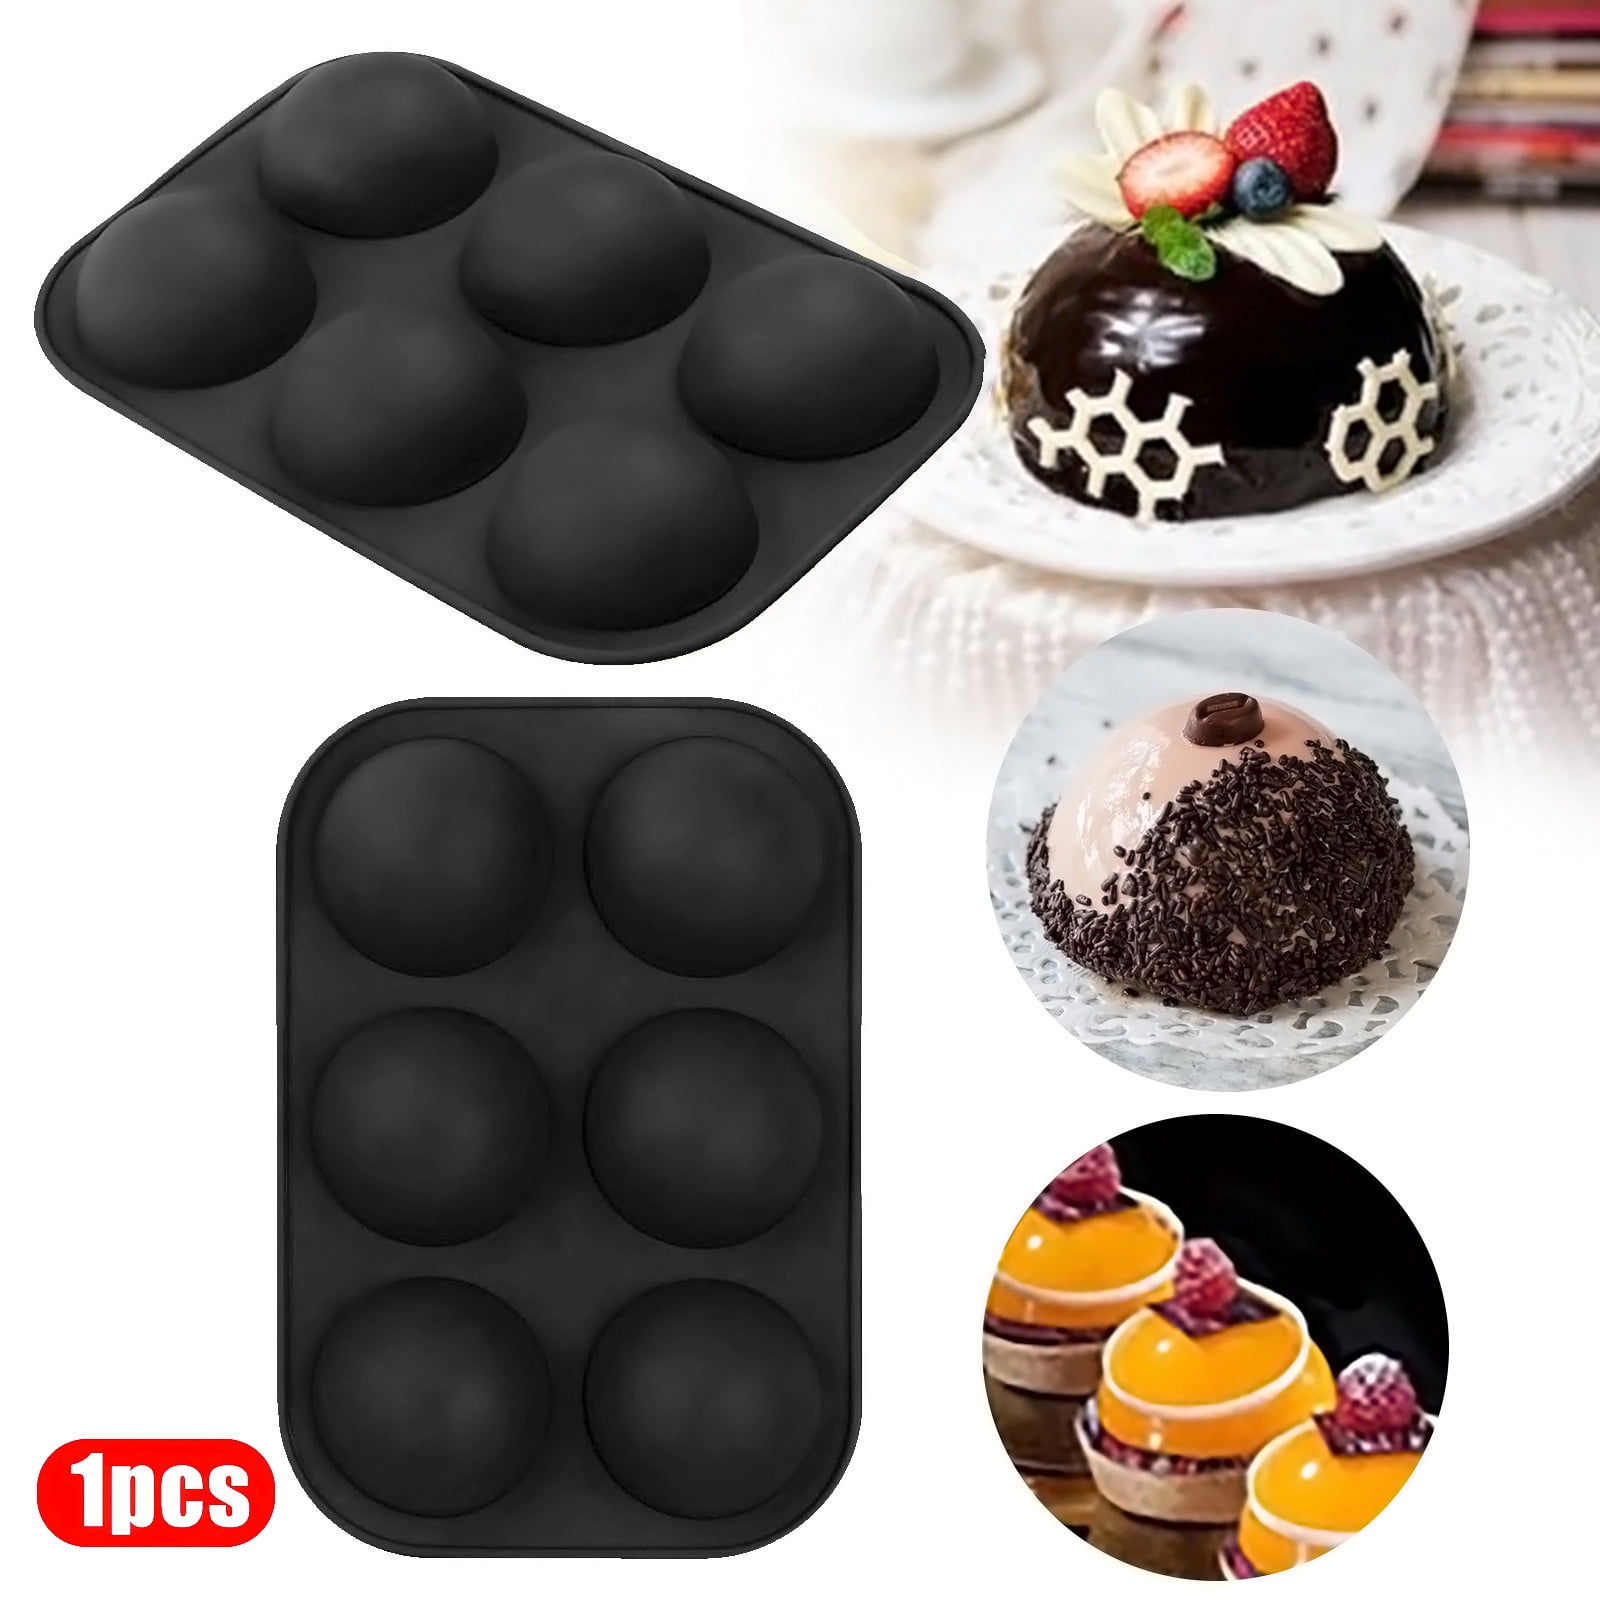 6 Half Round Silicone Cupcake Mold Muffin Chocolate Cake Baking Mould Pan Tools